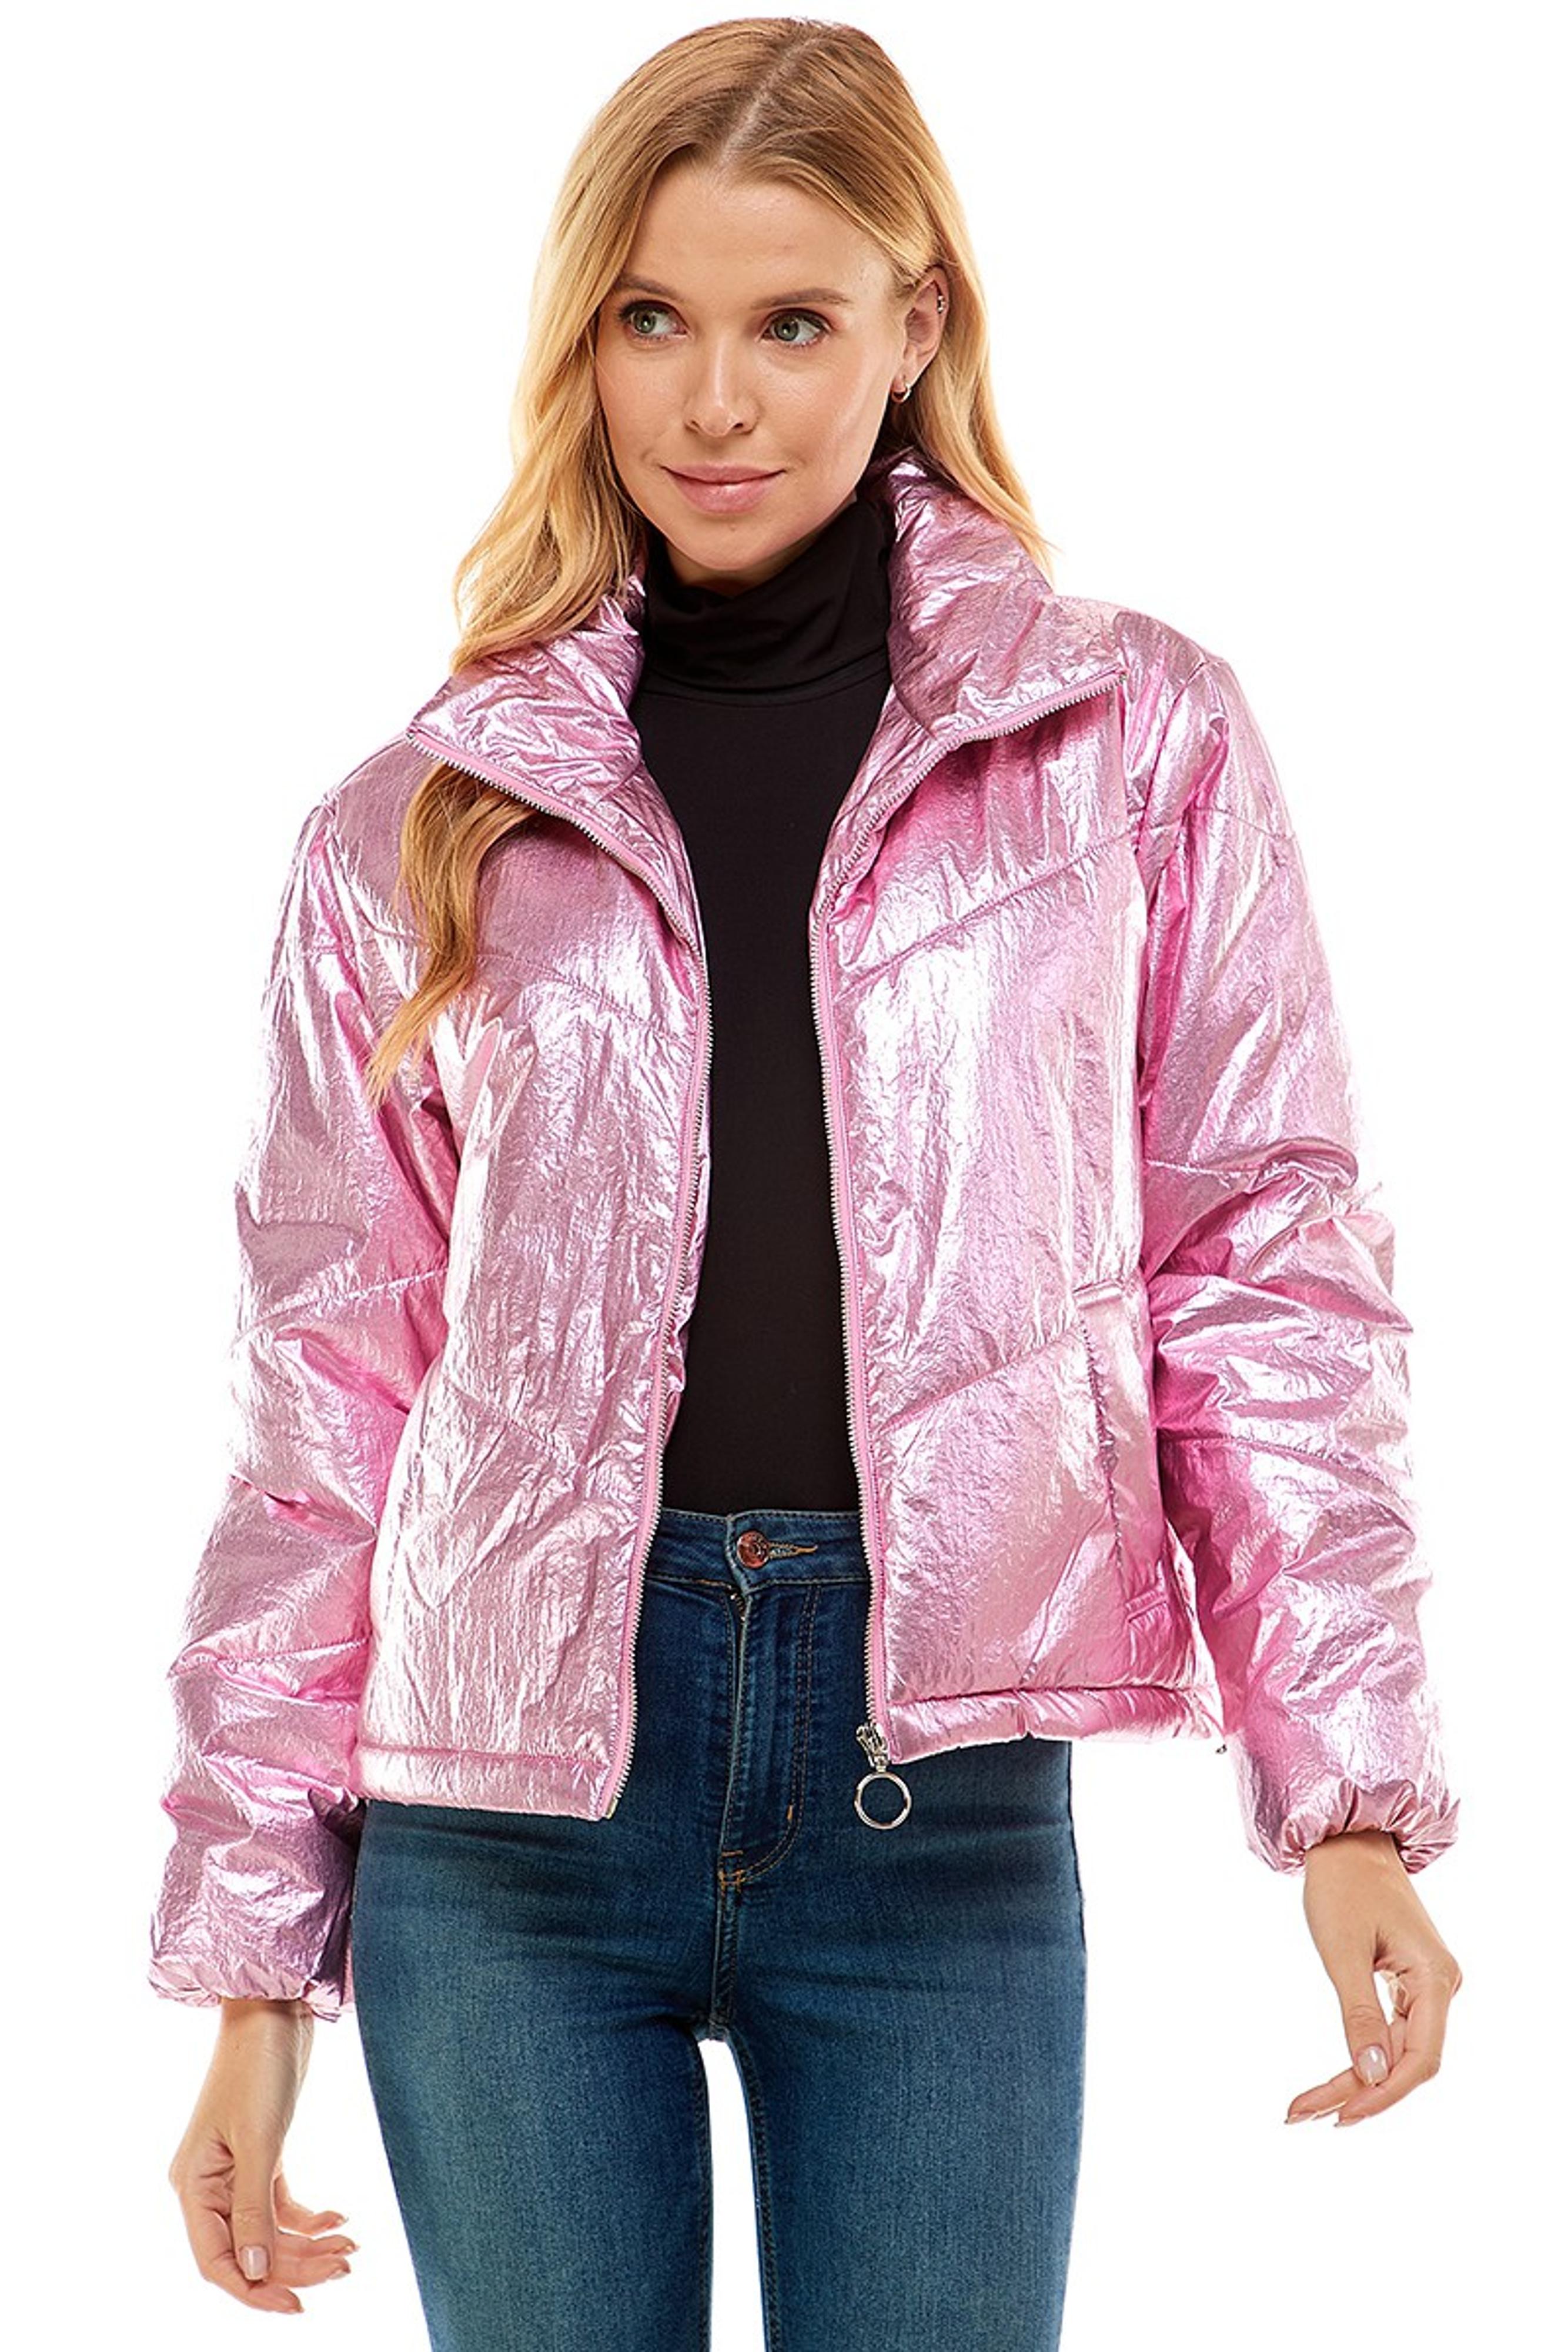  This Love Puffer Jacket